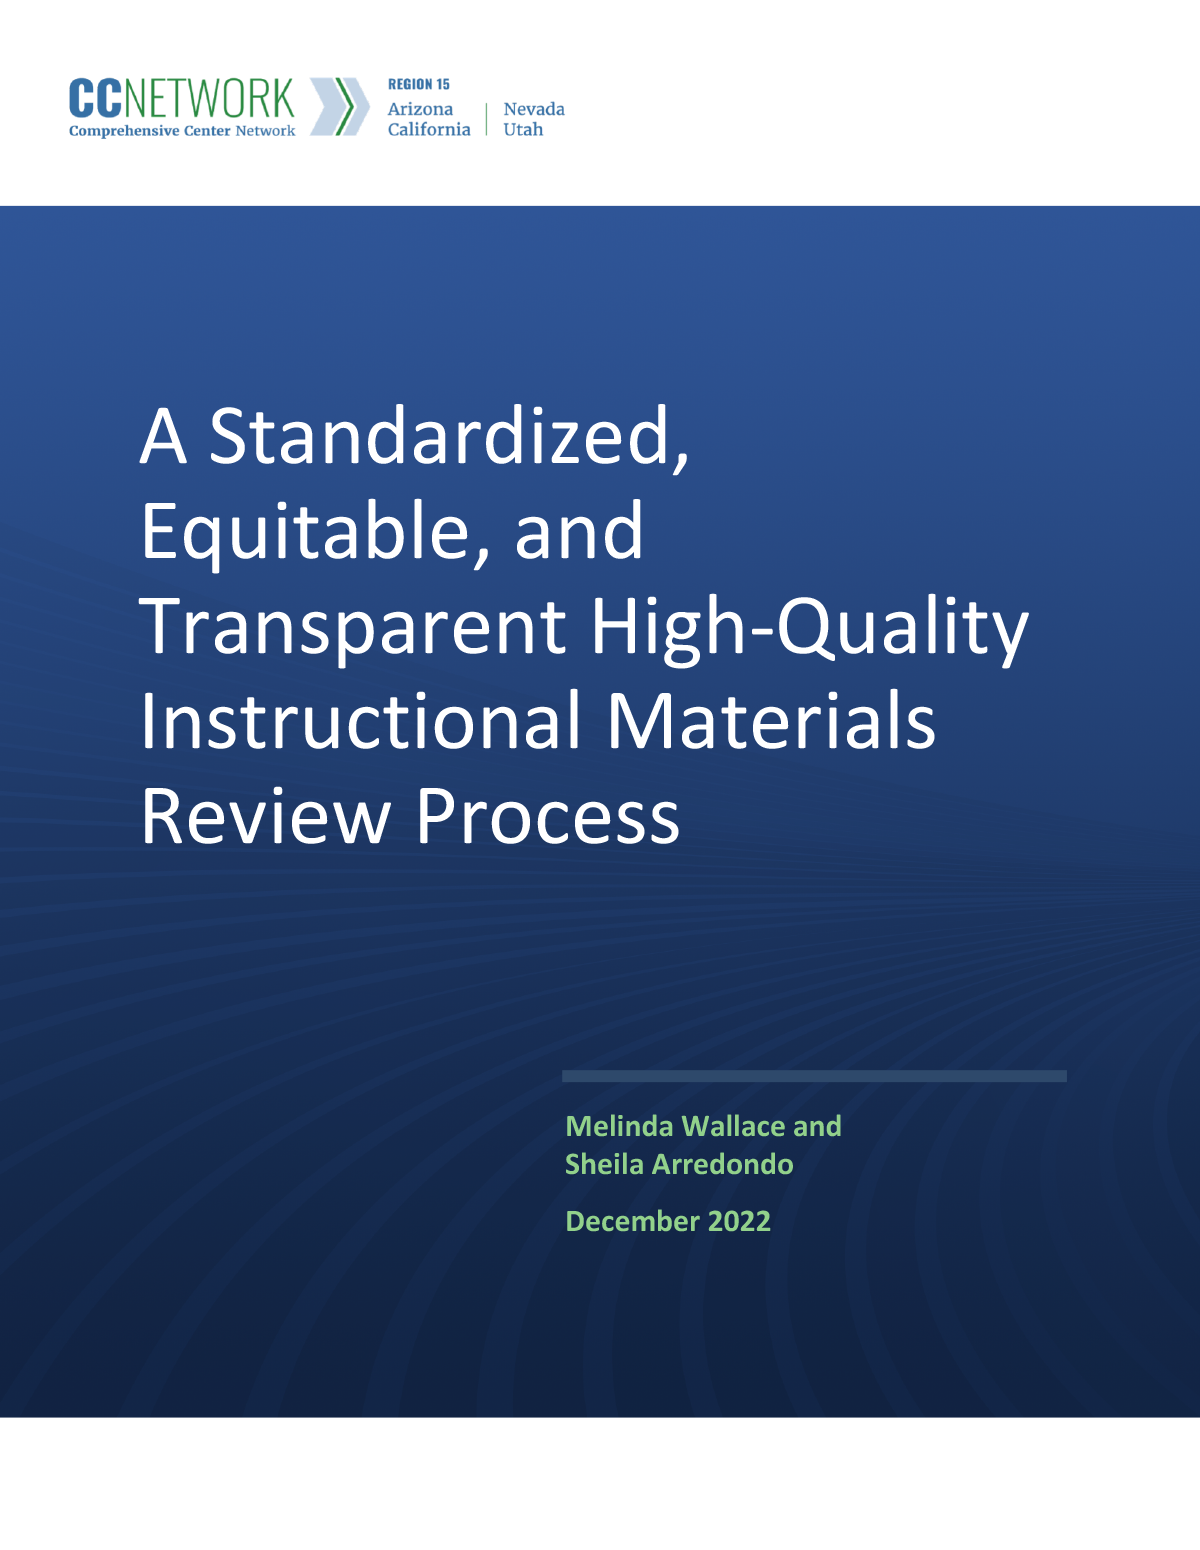 A Standardized, Equitable, and Transparent High-Quality Instructional Materials Review Process